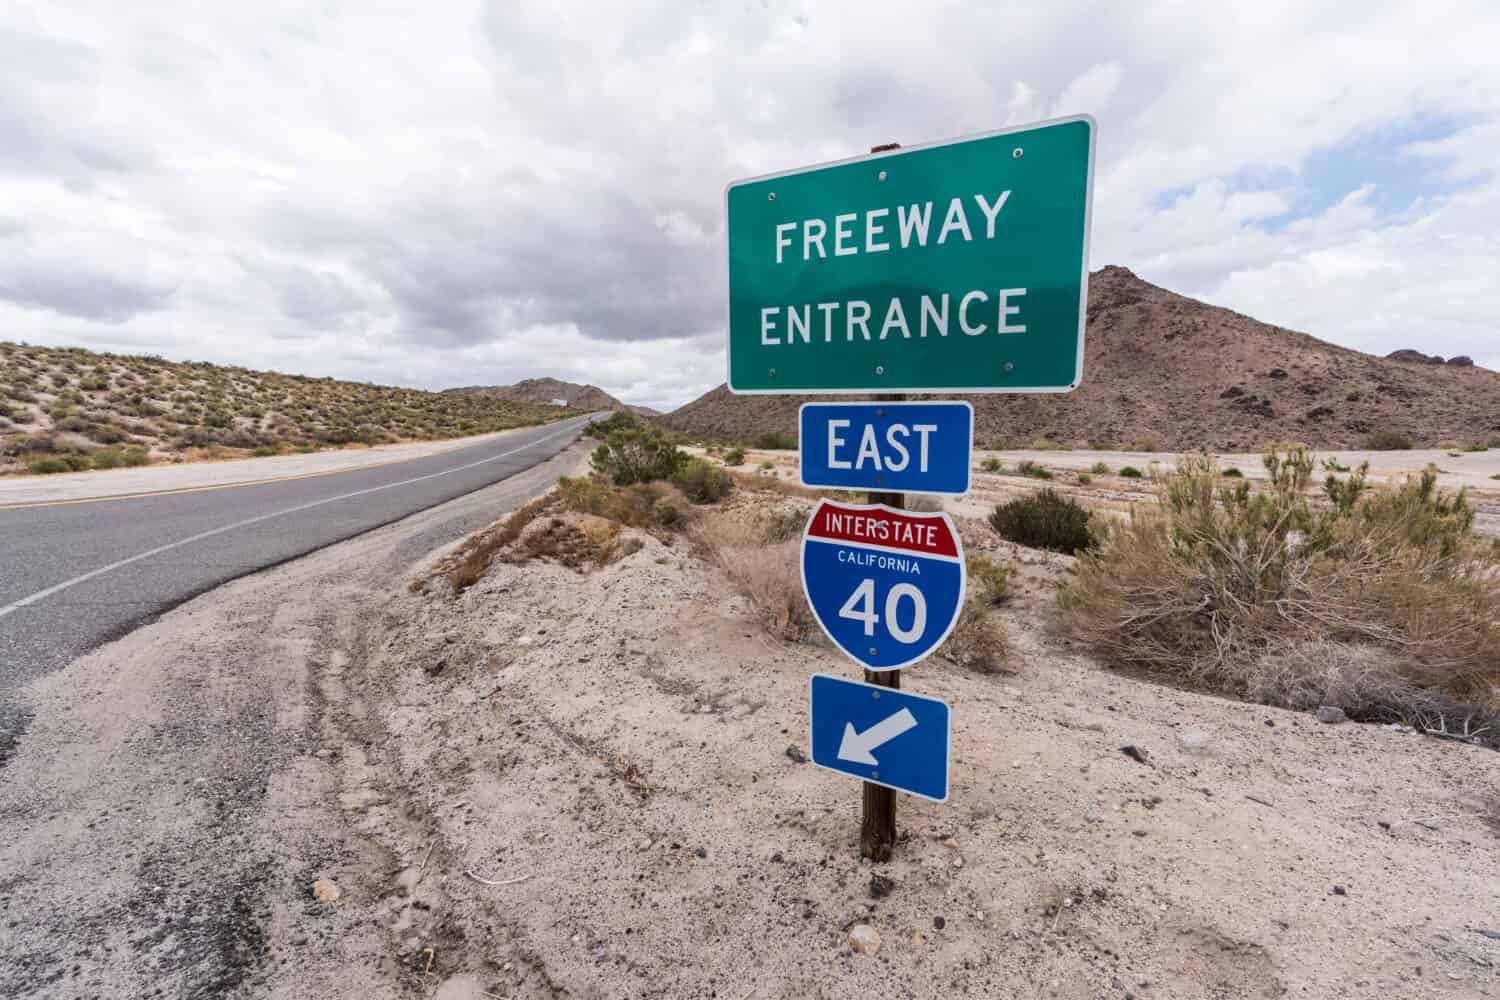 Interstate 40 east freeway on ramp sign near Mojave National Preserve in Southern California.